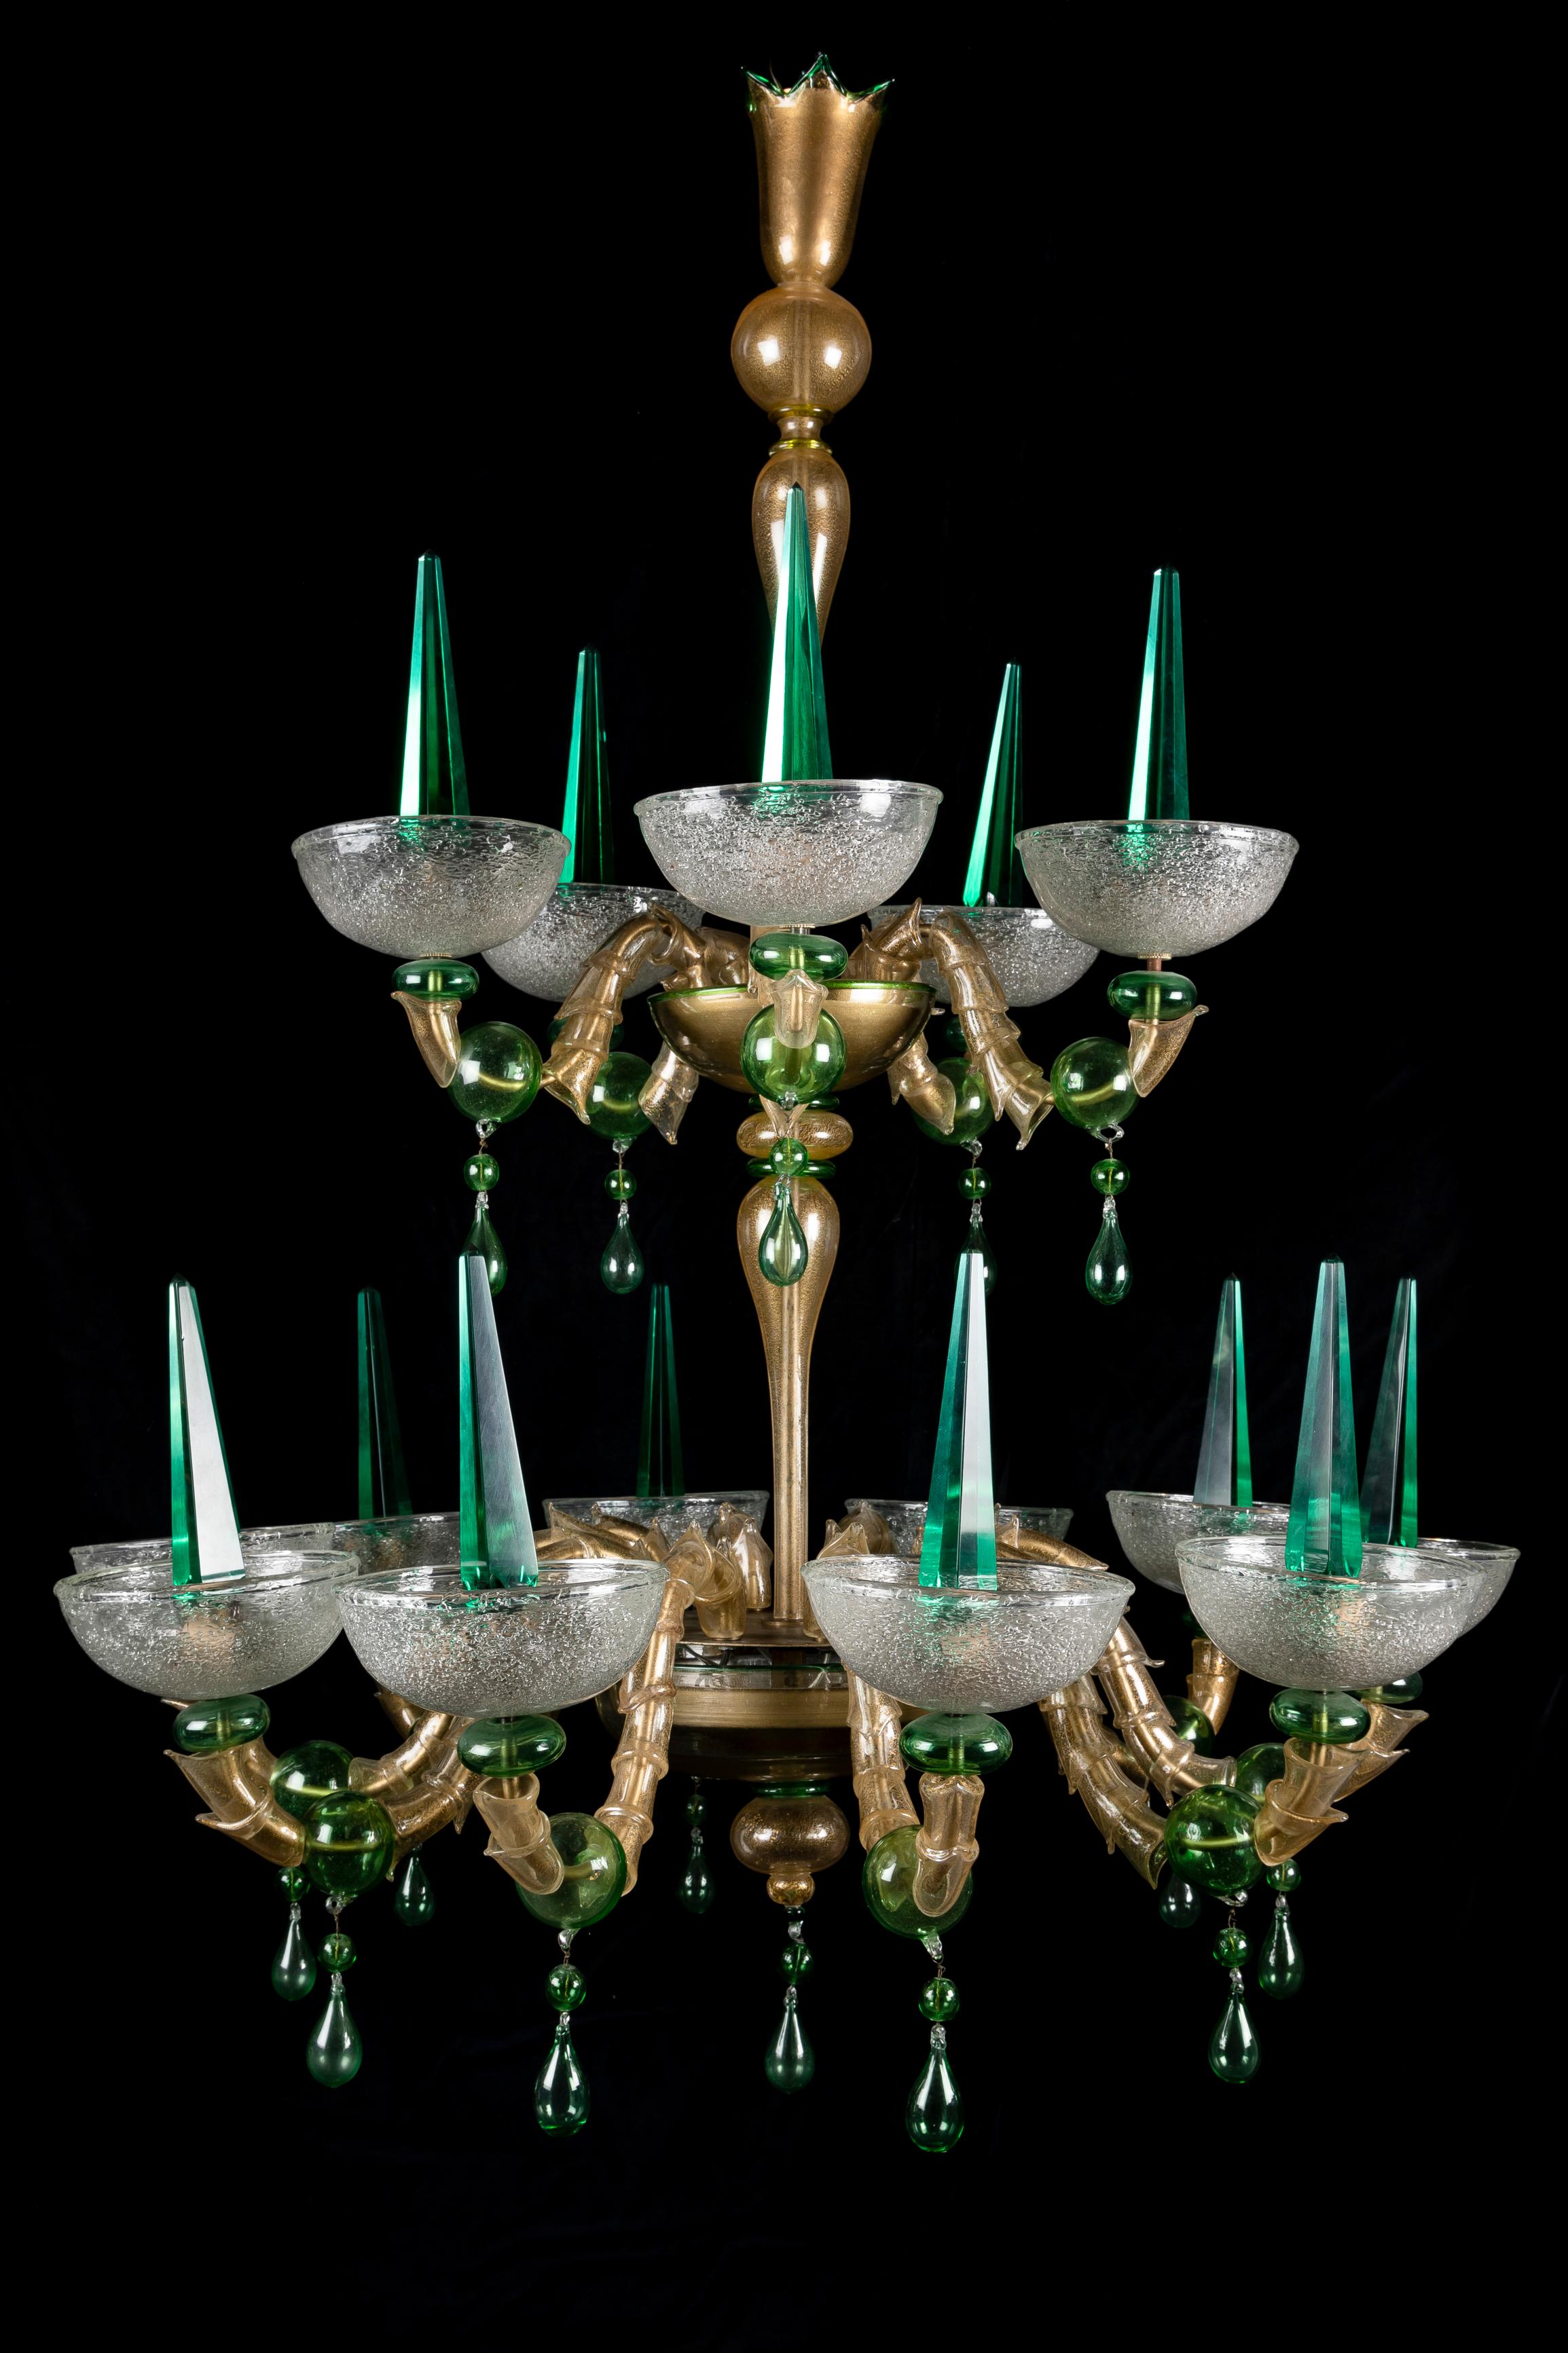 A Spectacular and Large Green Murano glass Mid Century Modern multi light double tier chandelier of the most unique form and intricate detail. This magnificent and very unusual green and gold dusted glass Murano chandelier is embellished with fine